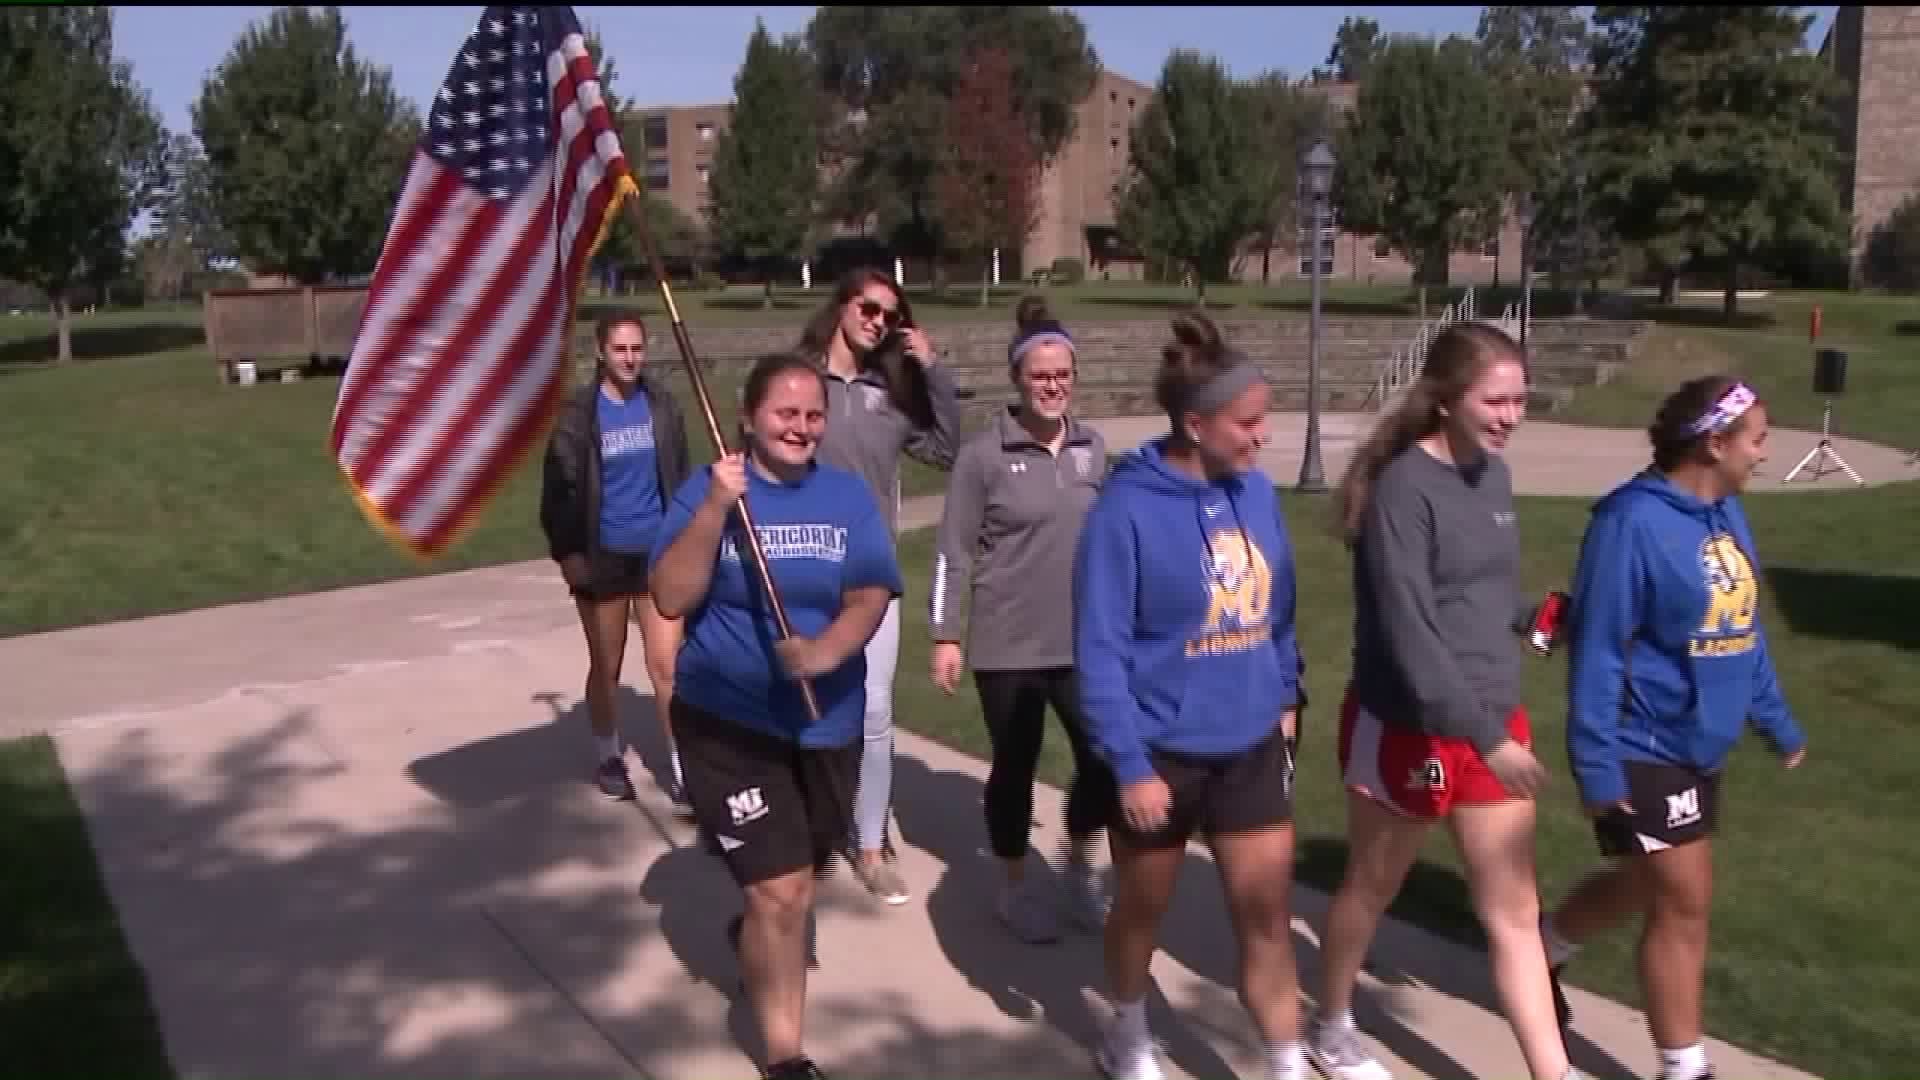 Misericordia Students Honor 9/11 with a Flag Carrying Demonstration